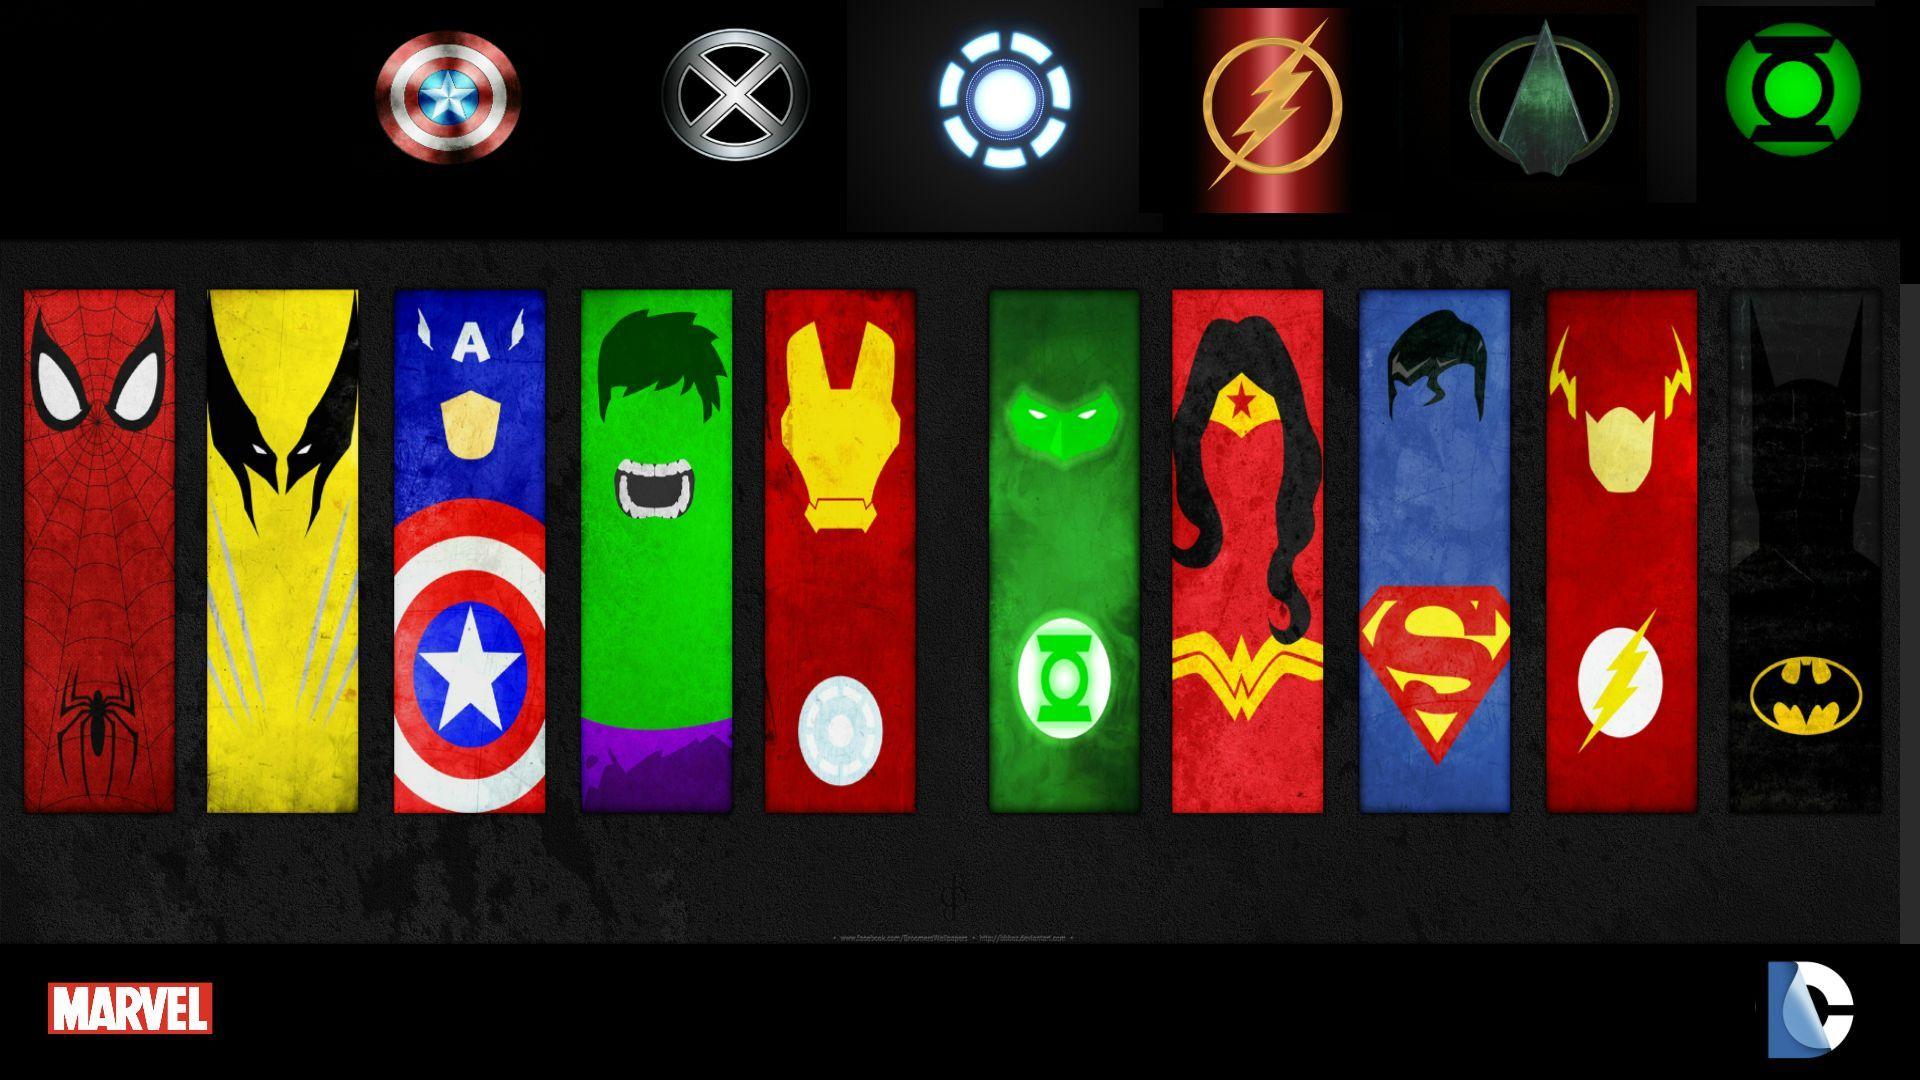 Marvel & DC Theme I made. What do you think?